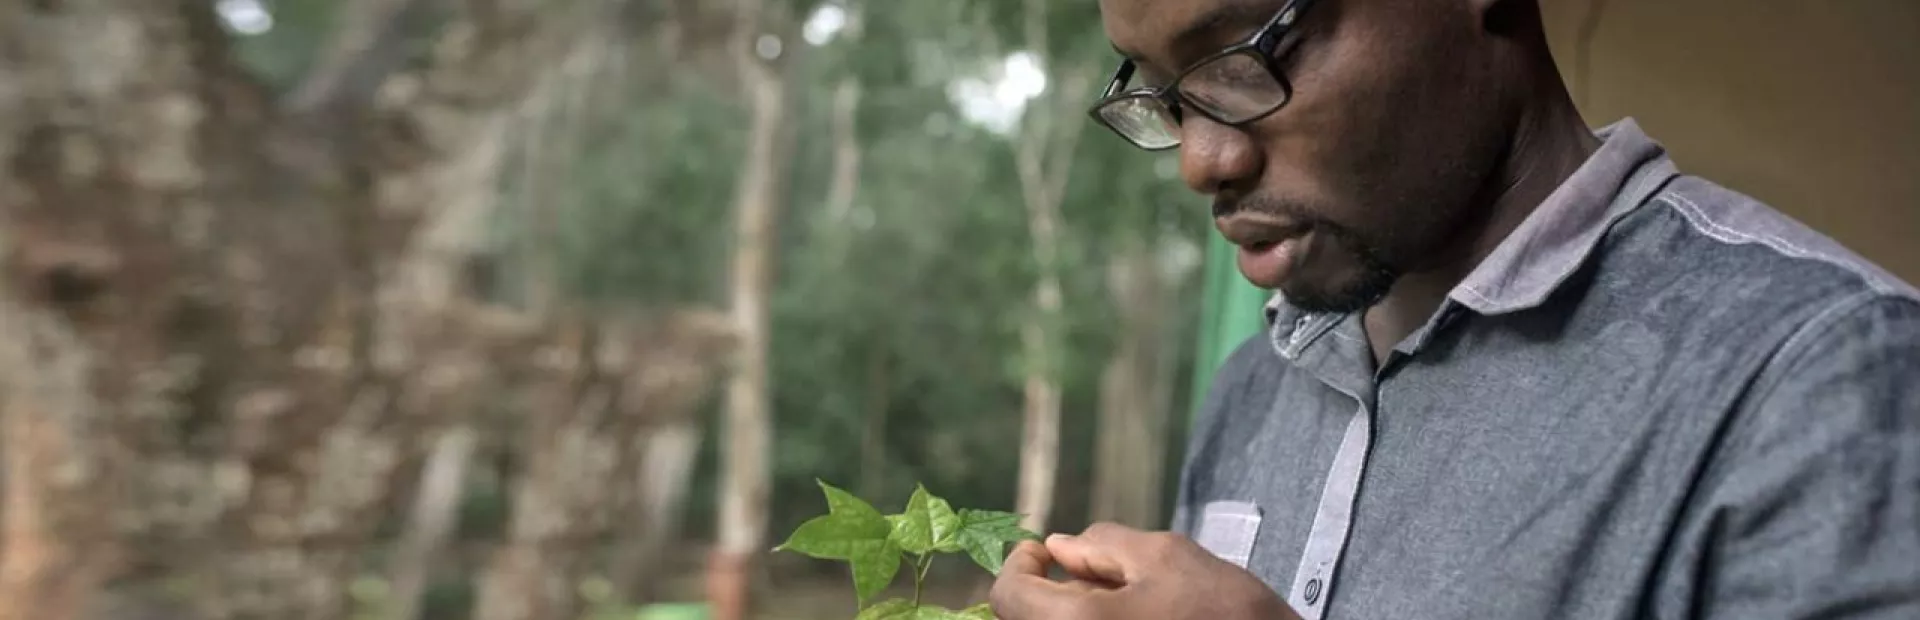 Researcher Edmund Ekuadzi, an expert on the medical properties of plants, examines a specimen gathered in his homeland of Ghana.